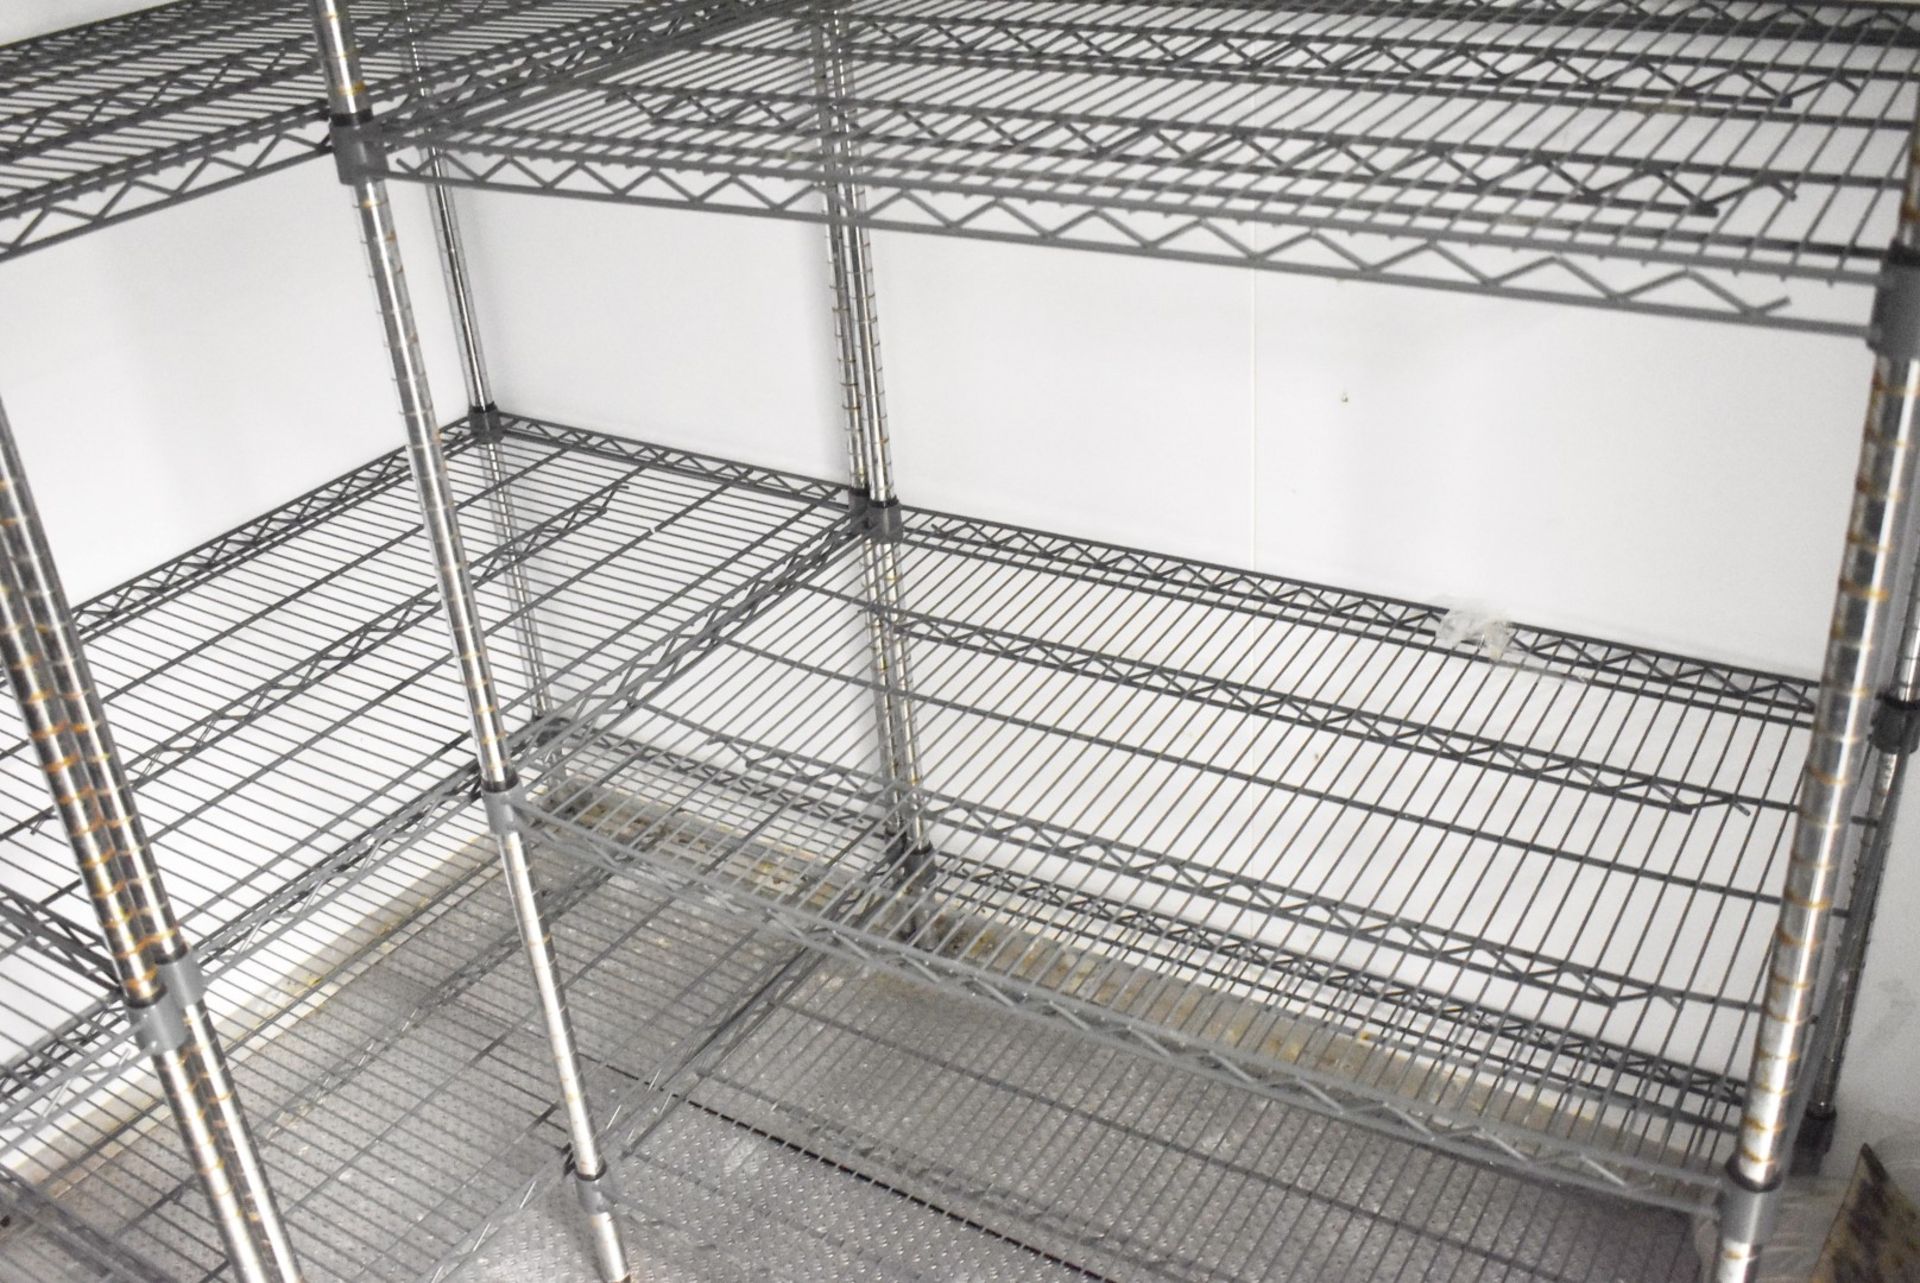 5 x Assorted Cold Room Wire Storage Shelf Units With Coated Shelves - H168 x W90-124 x D60 cms - Image 7 of 9